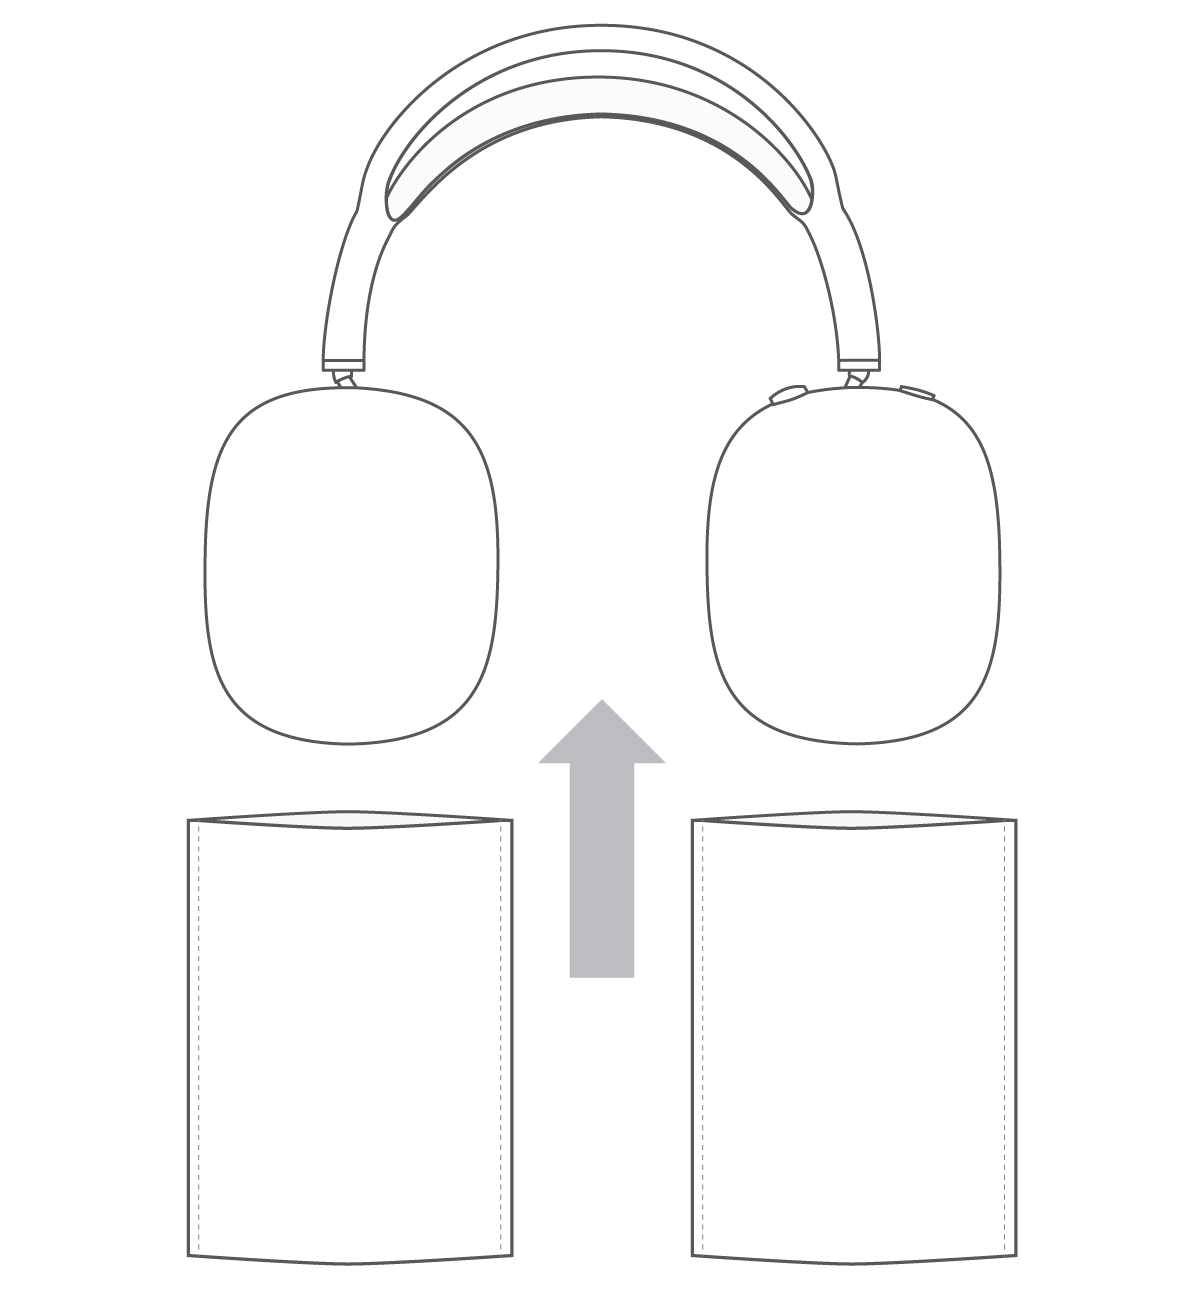 Place each earpiece in a separate bag.